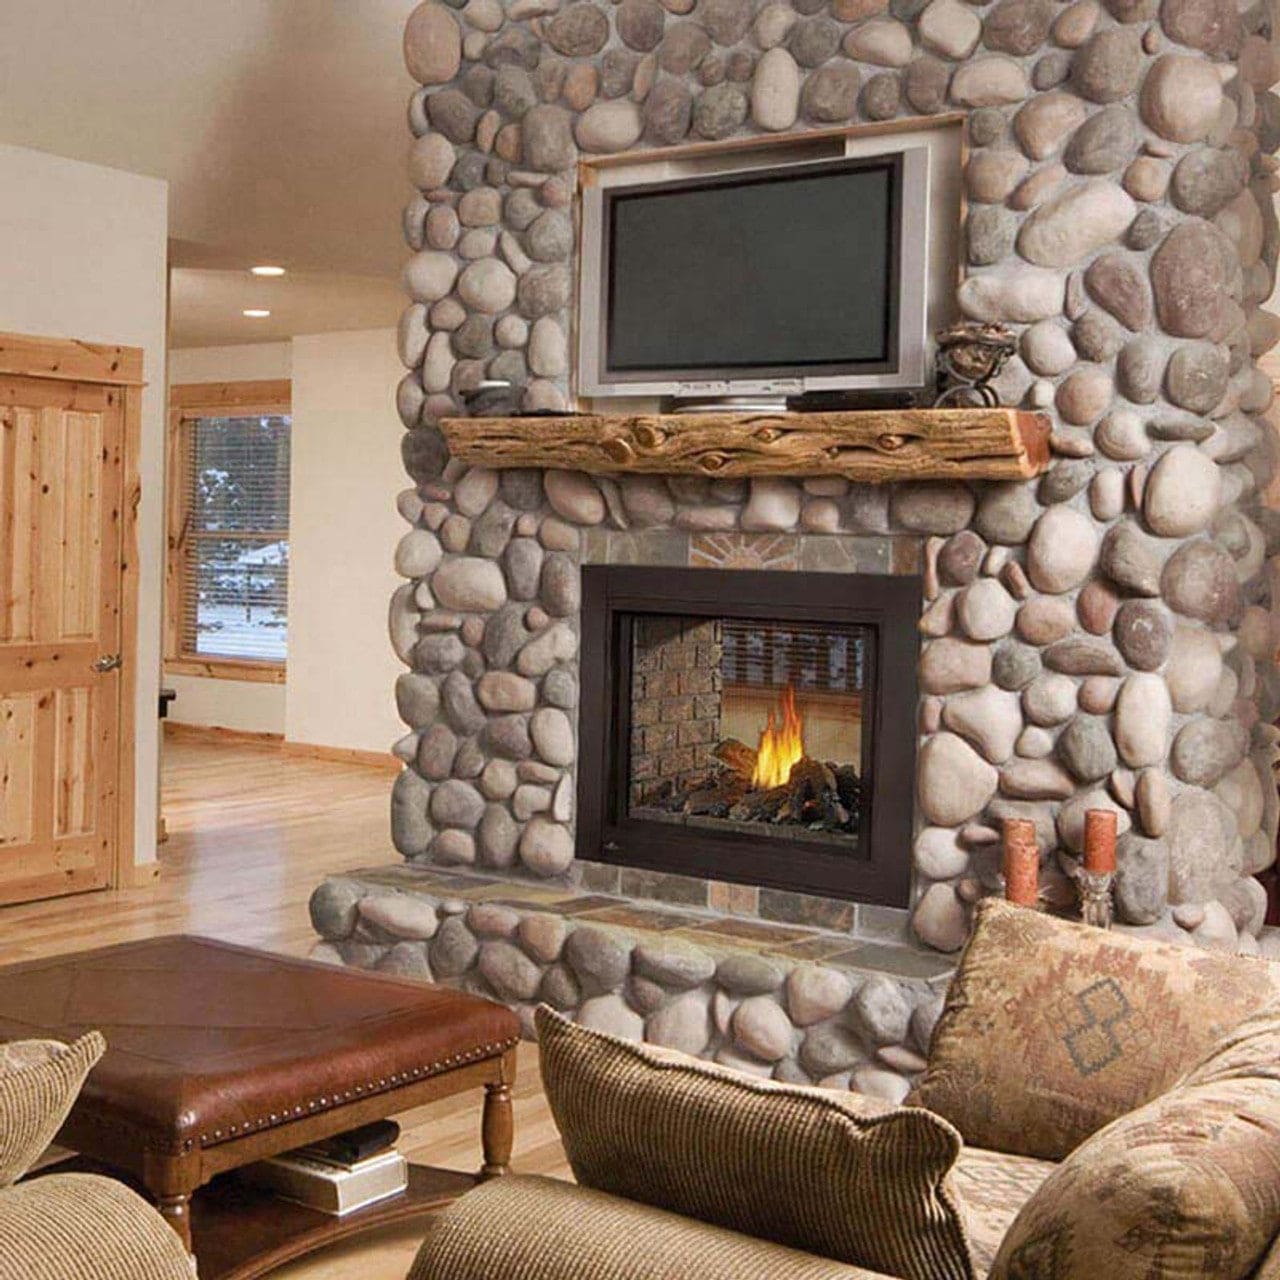 Napoleon Ascent Multi-View 3 Sided Log Set Direct Vent Natural Gas Fireplace - BHD4PNA - Chimney Cricket